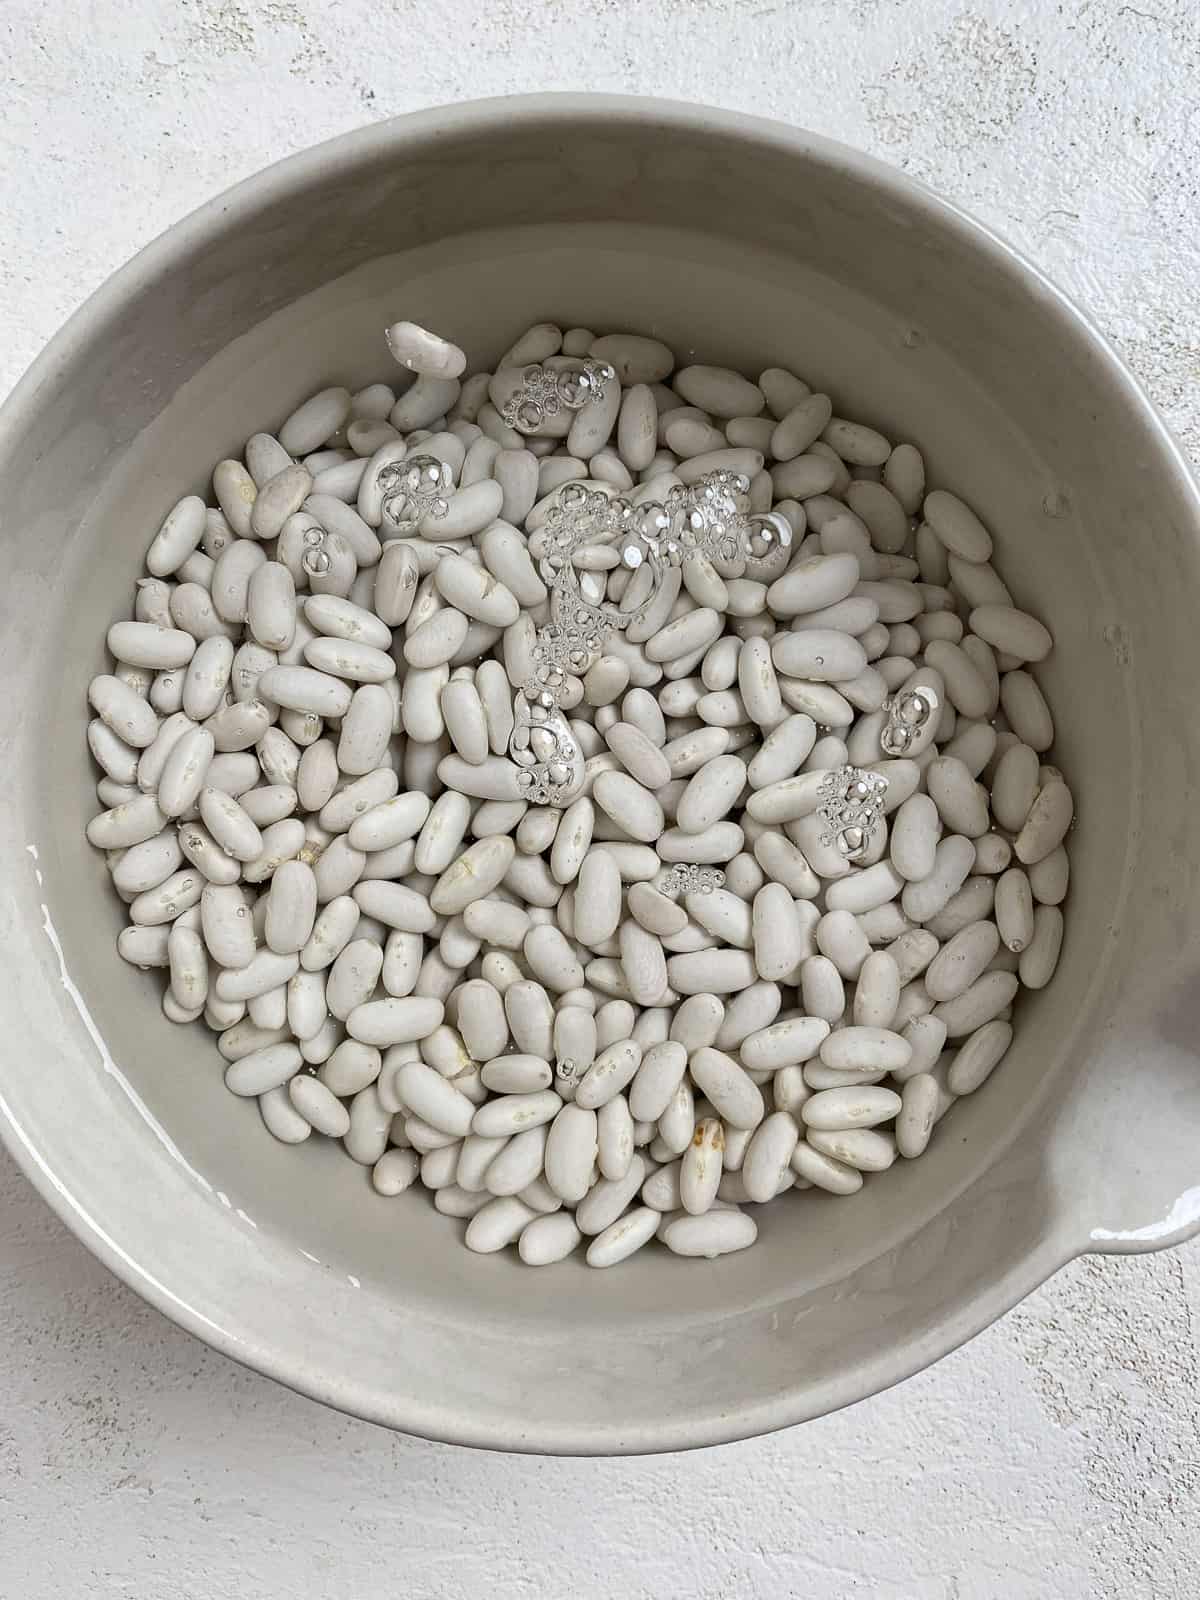 process shot of soaking beans in a bowl against a white surface